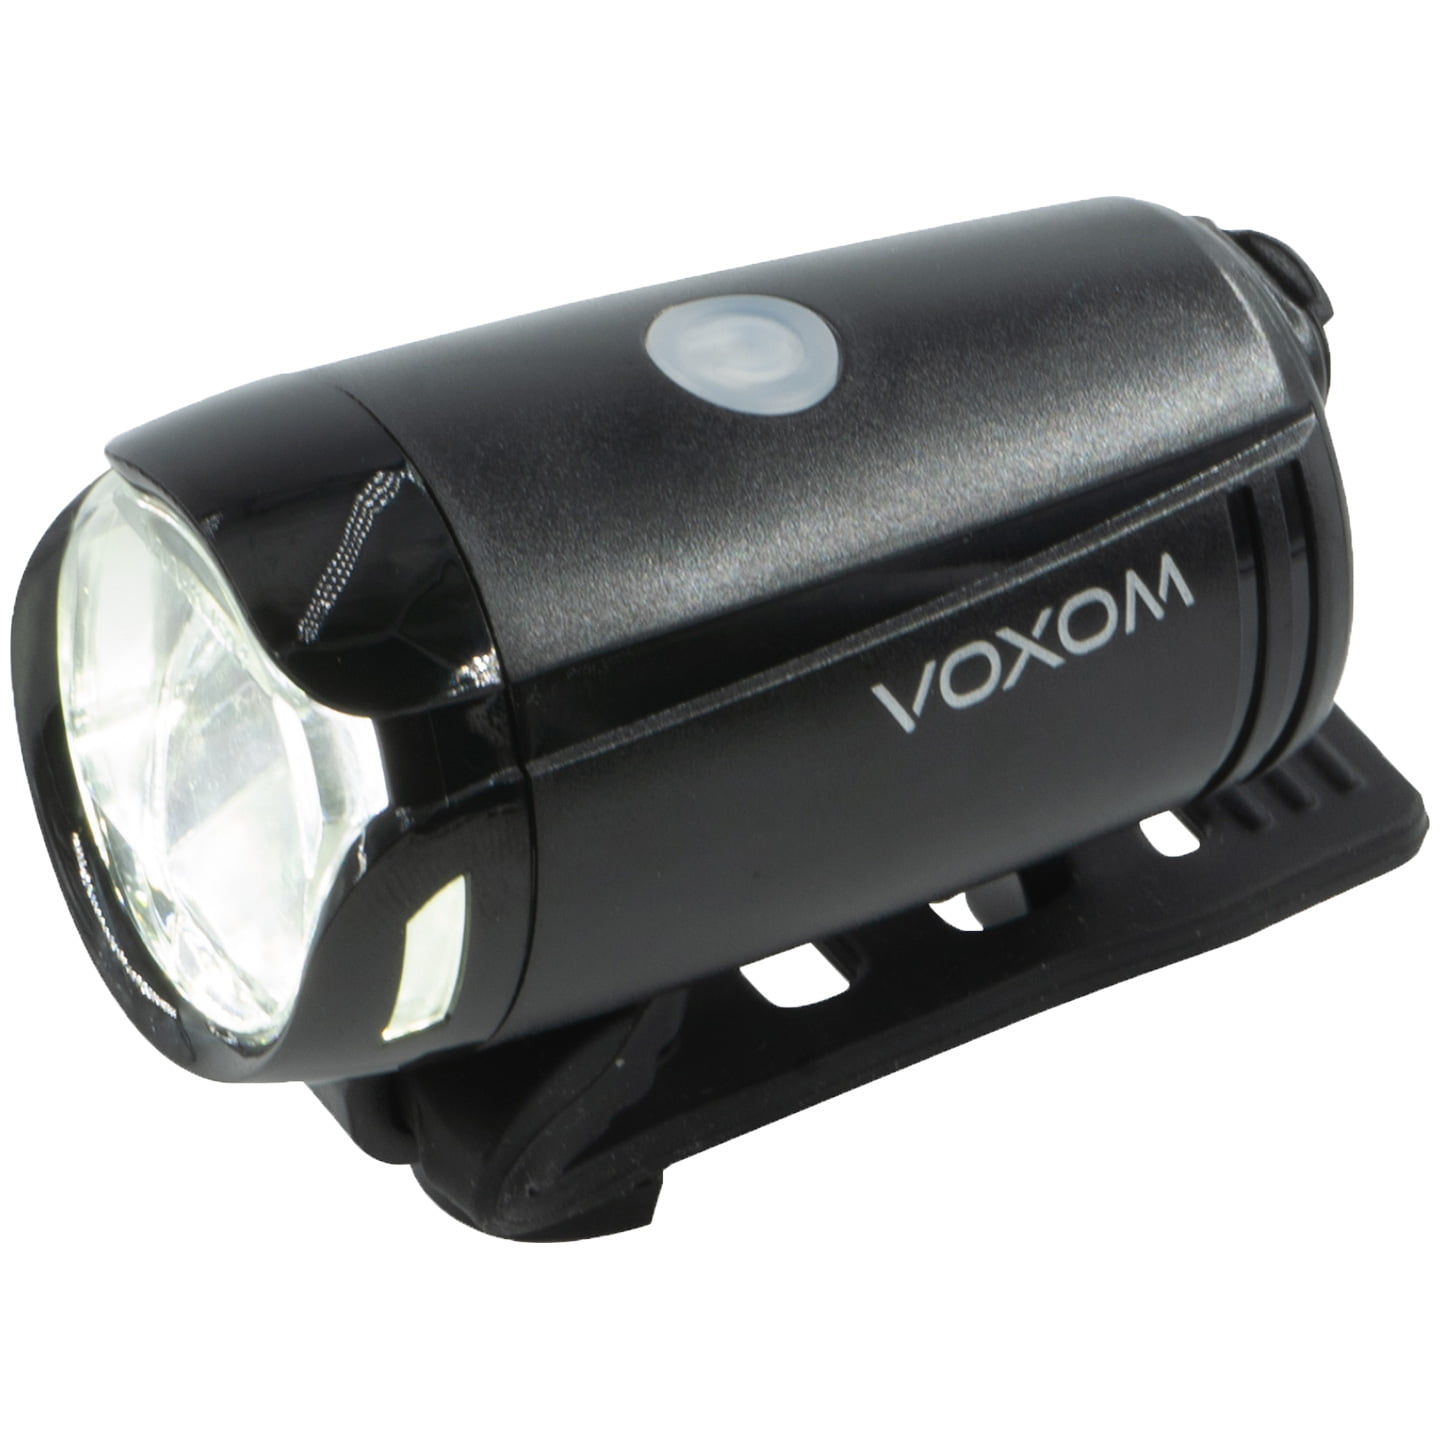 VOXOM Lv15 Bicycle Light, Bicycle light, Bike accessories